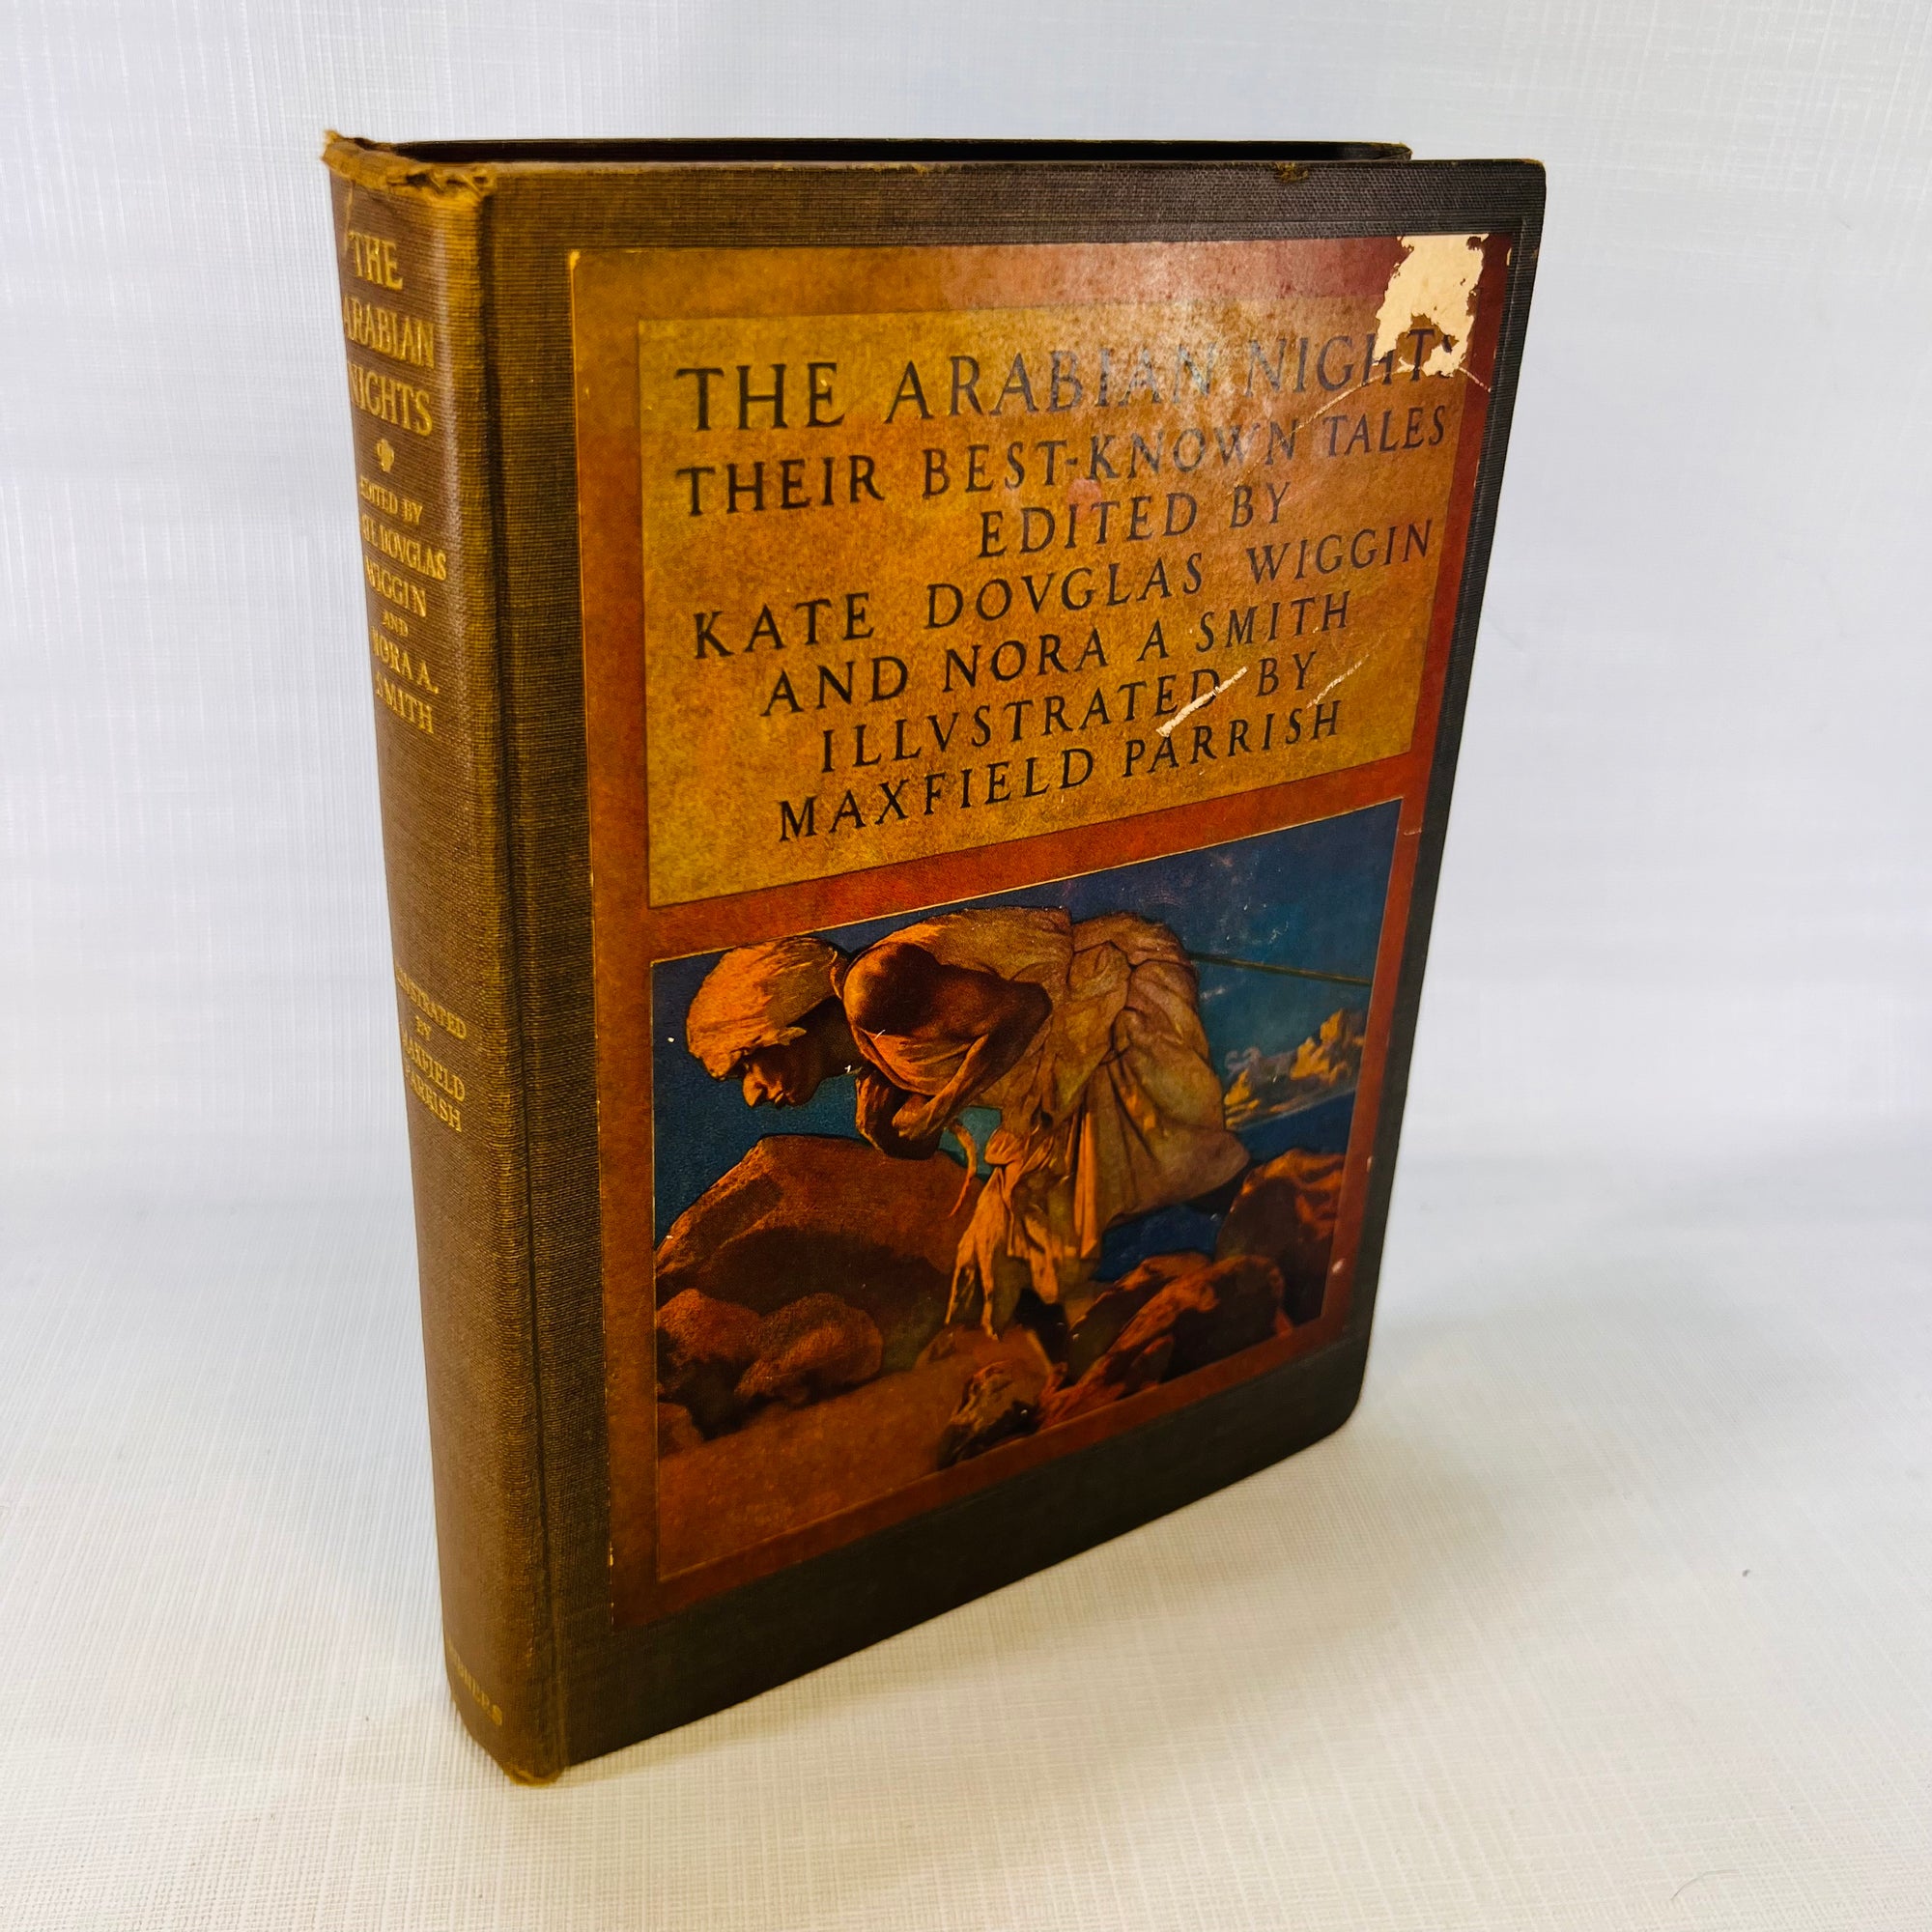 The Arabian Nights Their Best Knows Tales edited by Kate Dovglas Wiggin illustrated by Maxfield Parrish 1909 Charles Scribner's Sons